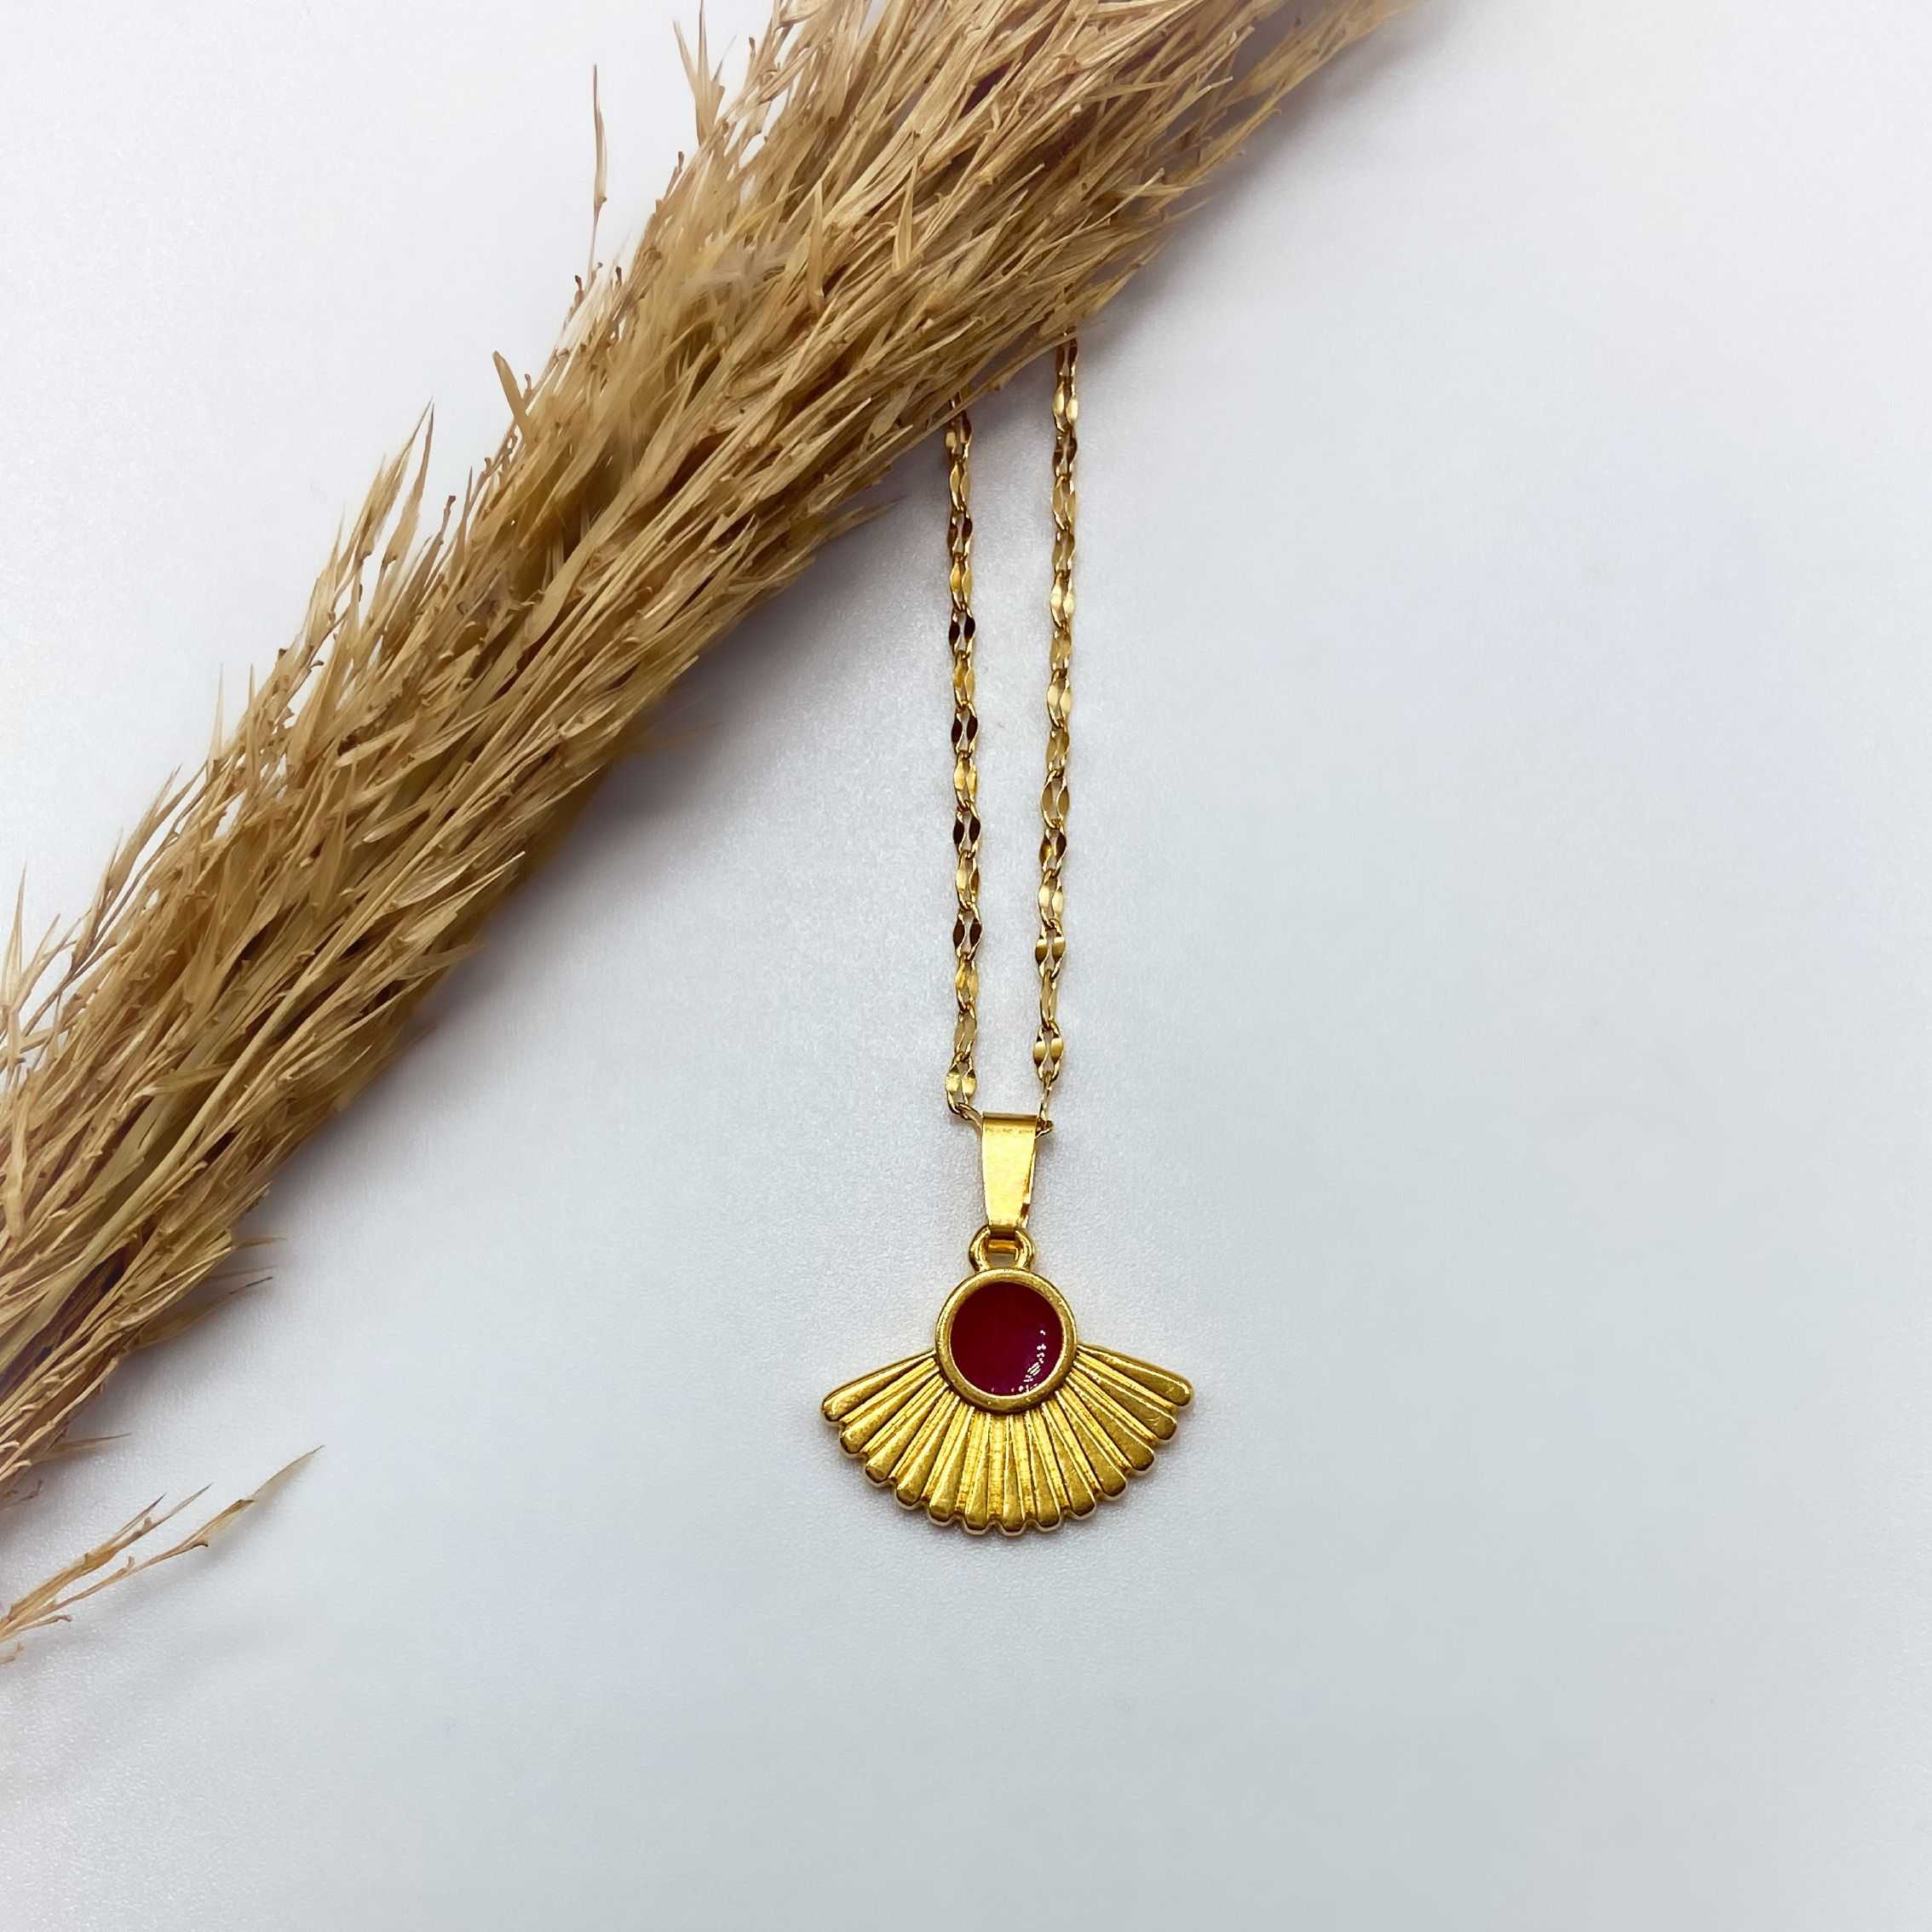 HELIA NECKLACE - GOLD & RED